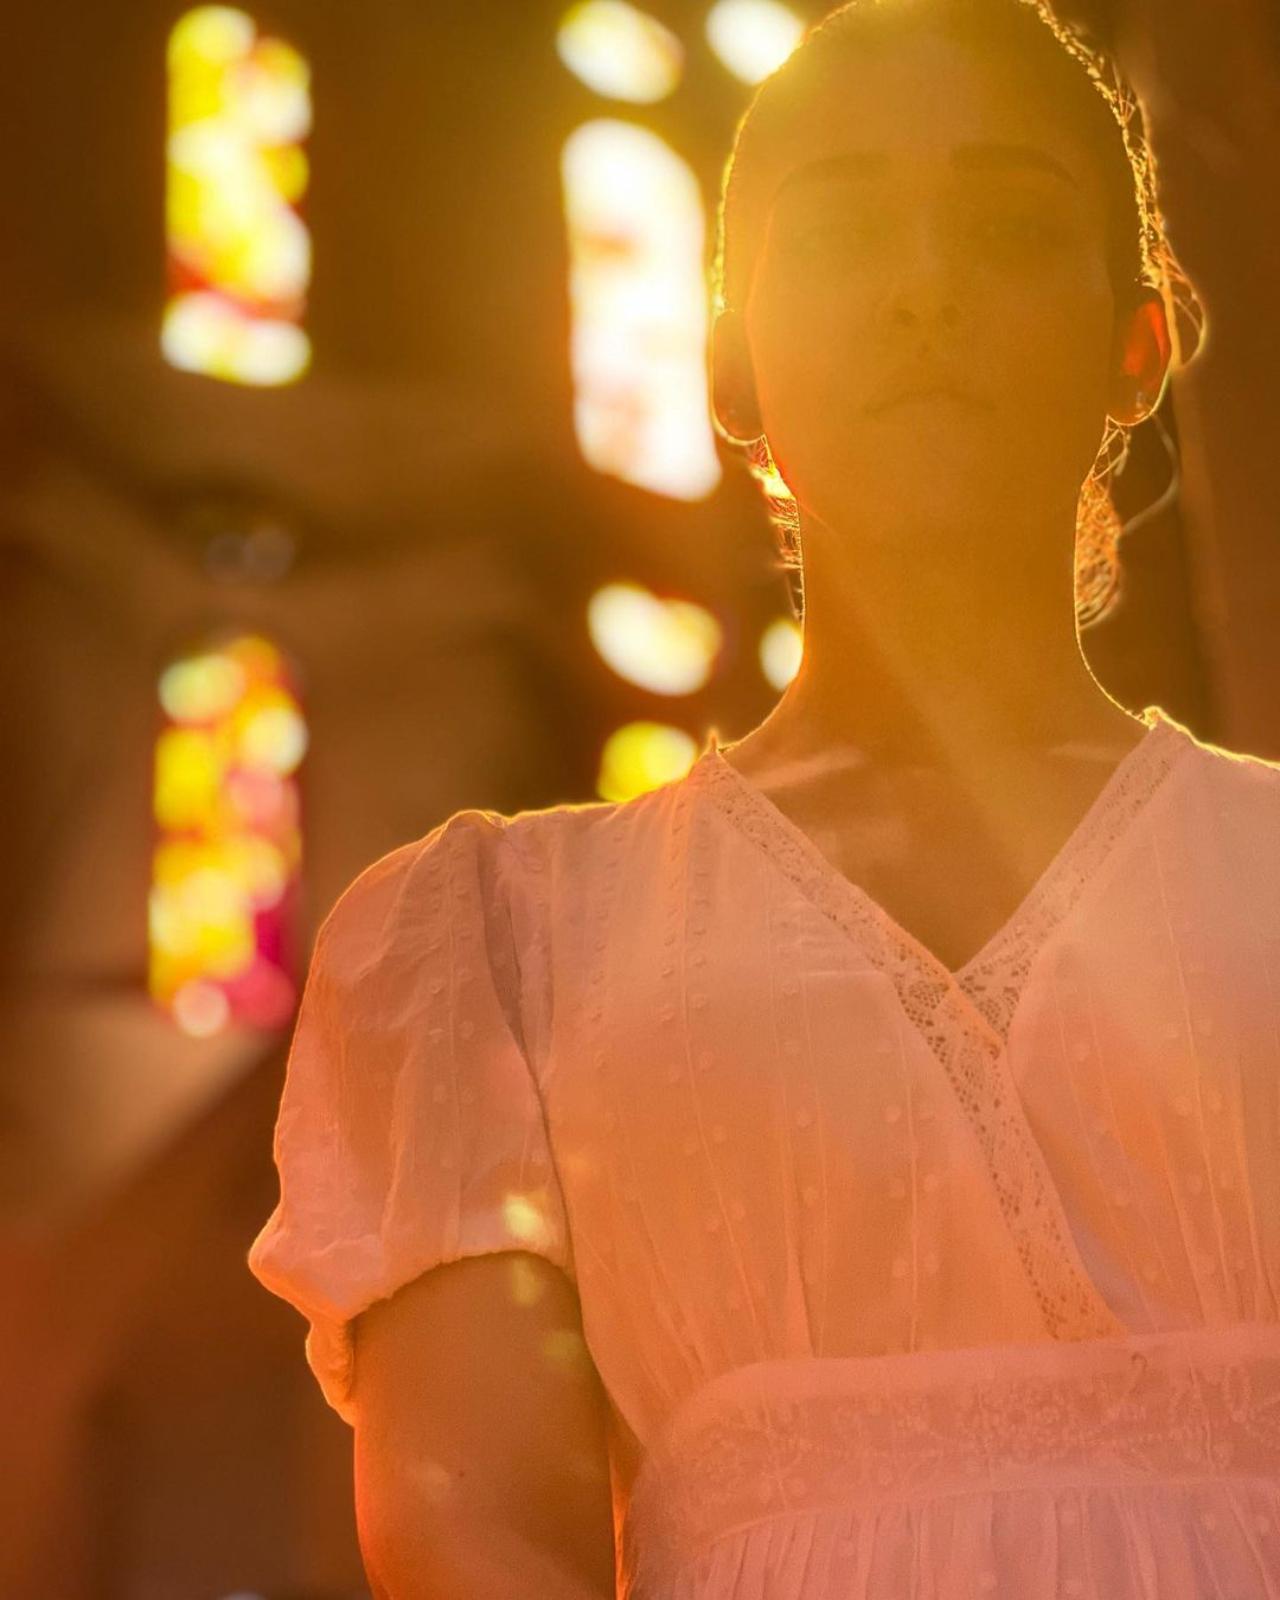 Vignesh also shared a series of pictures of Nayanthara in a dimly lit building in the country